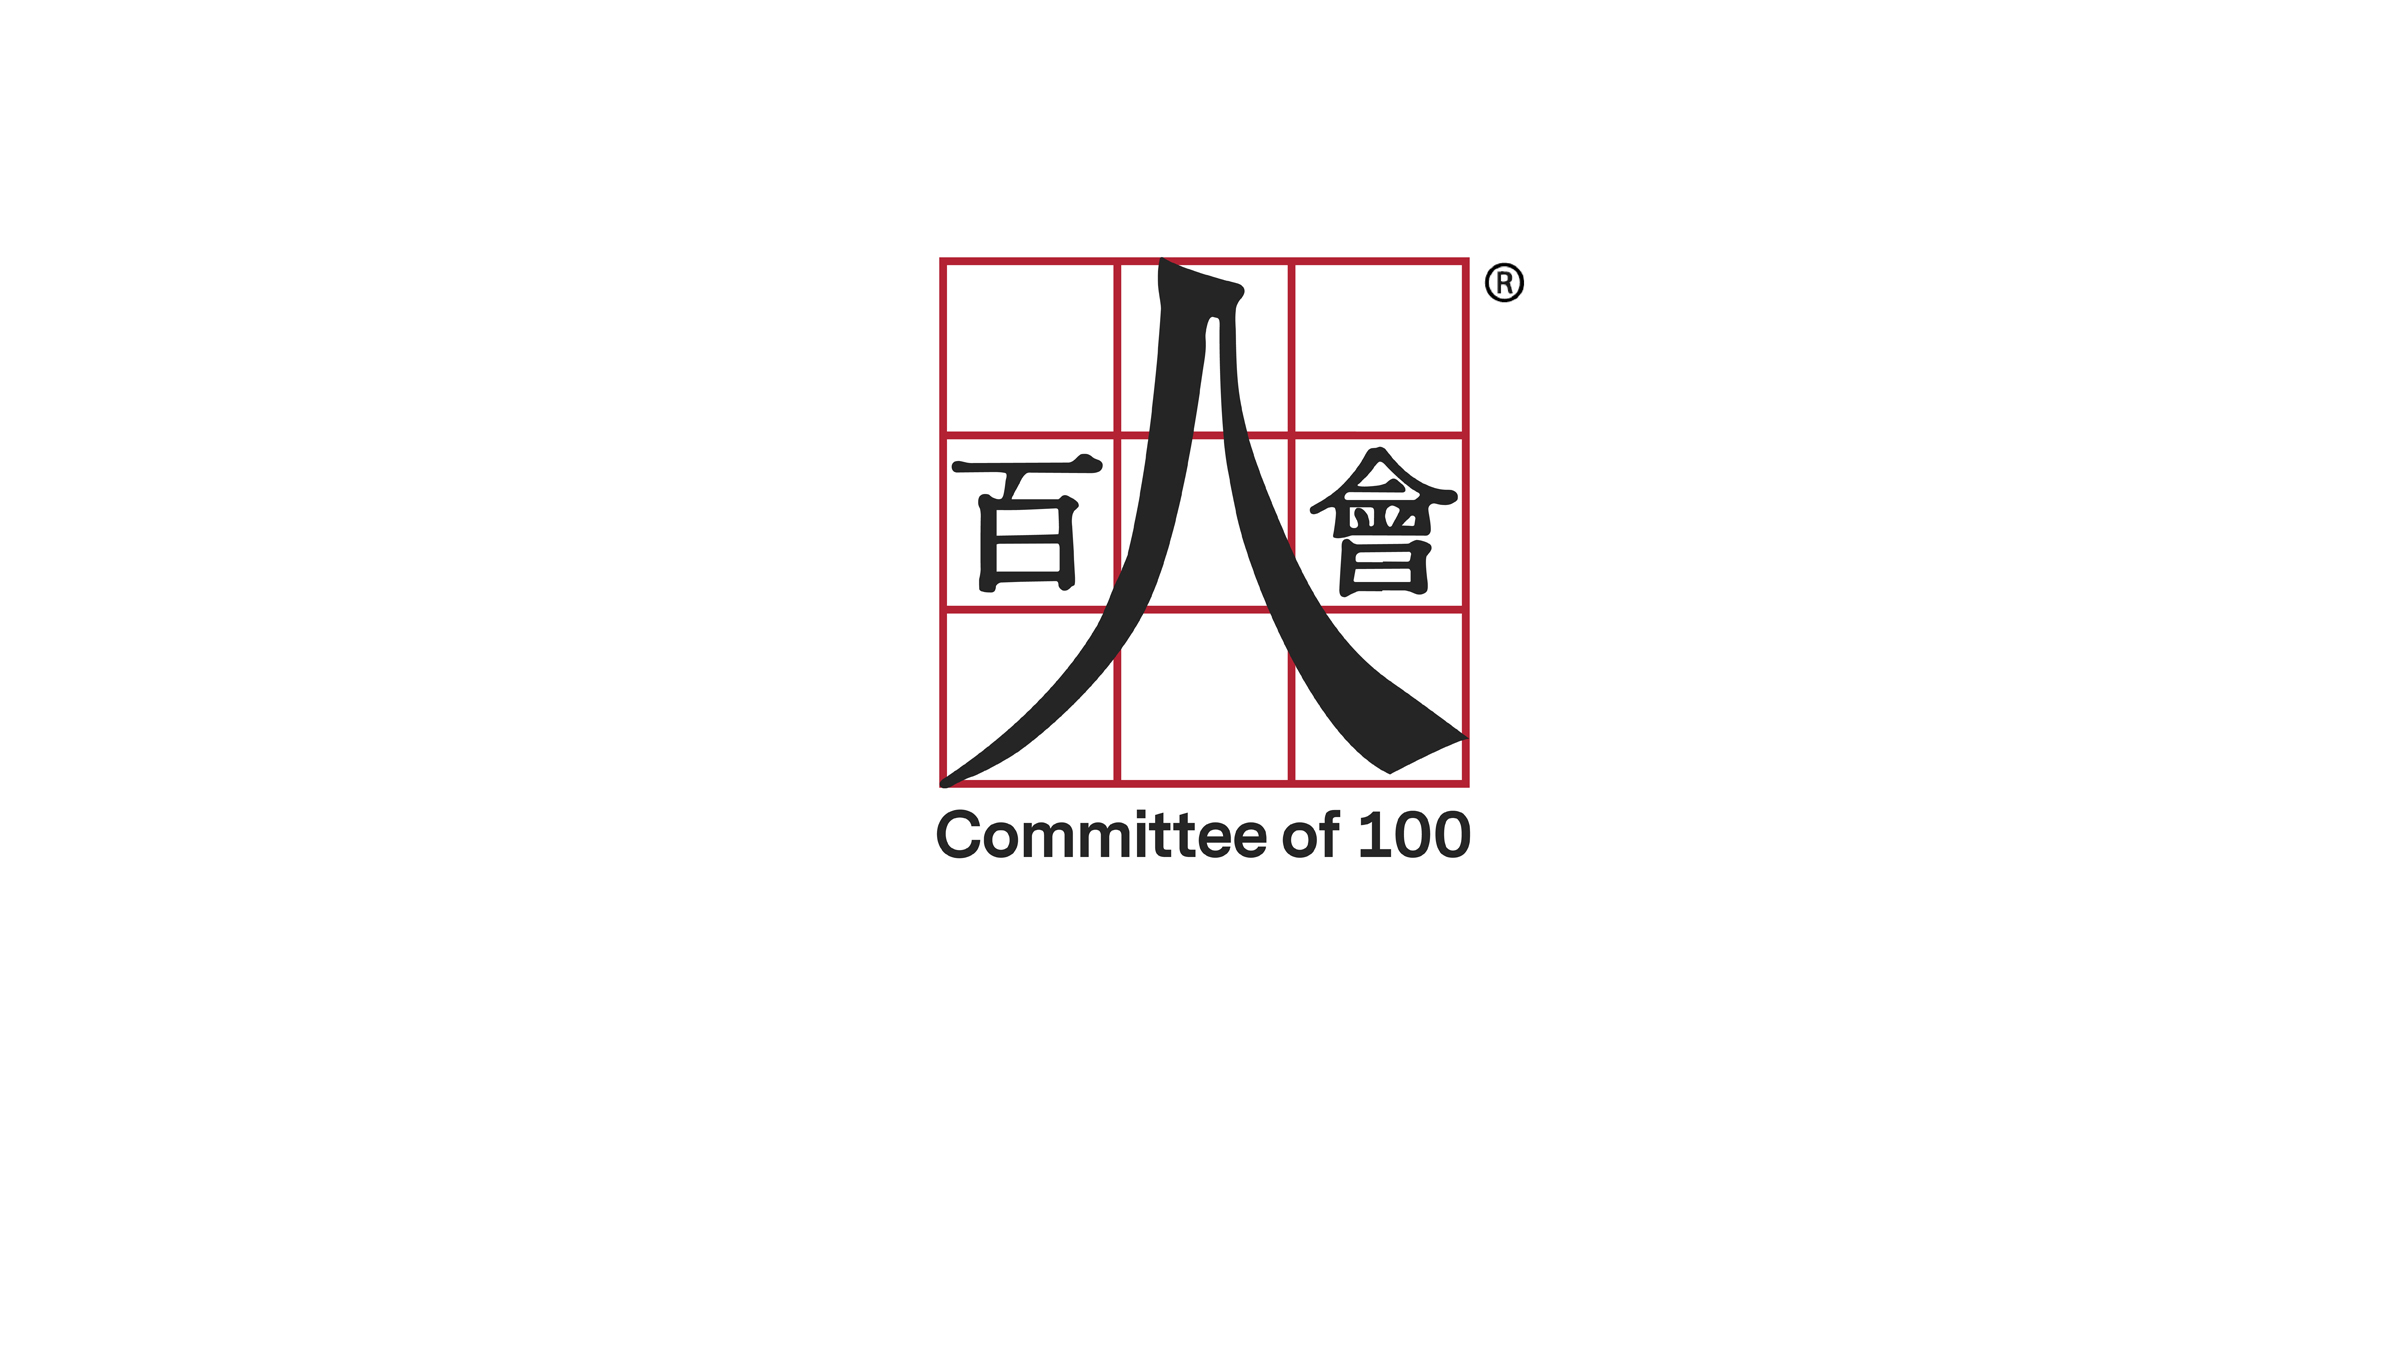 Committee of 100 Voices Its Support For The Teaching Asian American, Native Hawaiian, and Pacific Islander History Act